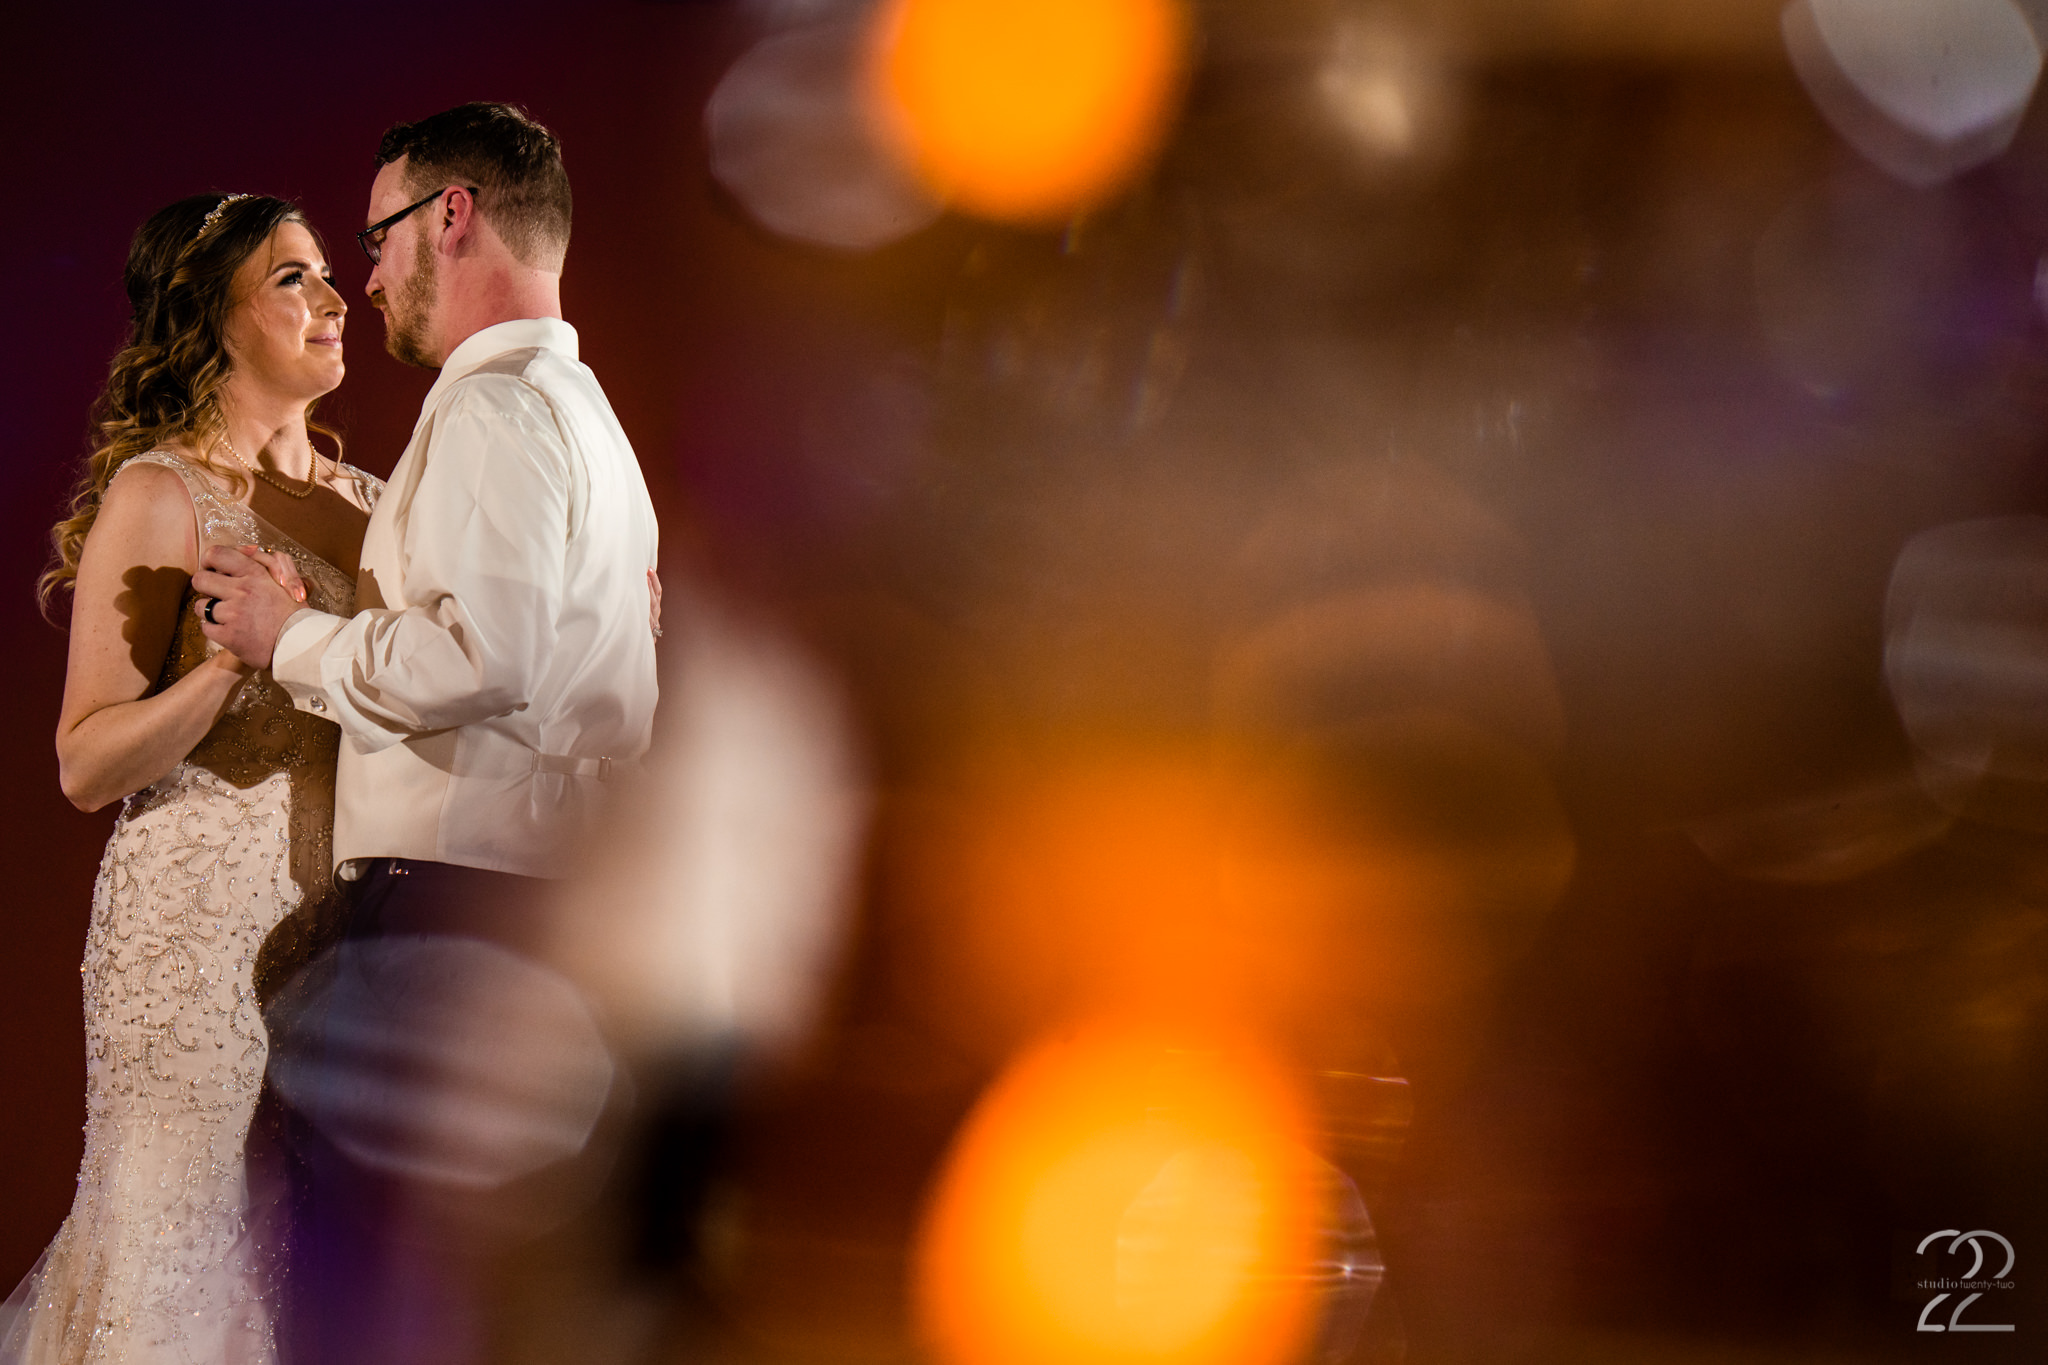  First dances are always a special part of a wedding day, and having a great DJ is part of the wedding day that is important to keep in mind! Finding a great DJ that will keep the party going is crucial to a fantastic wedding reception. 